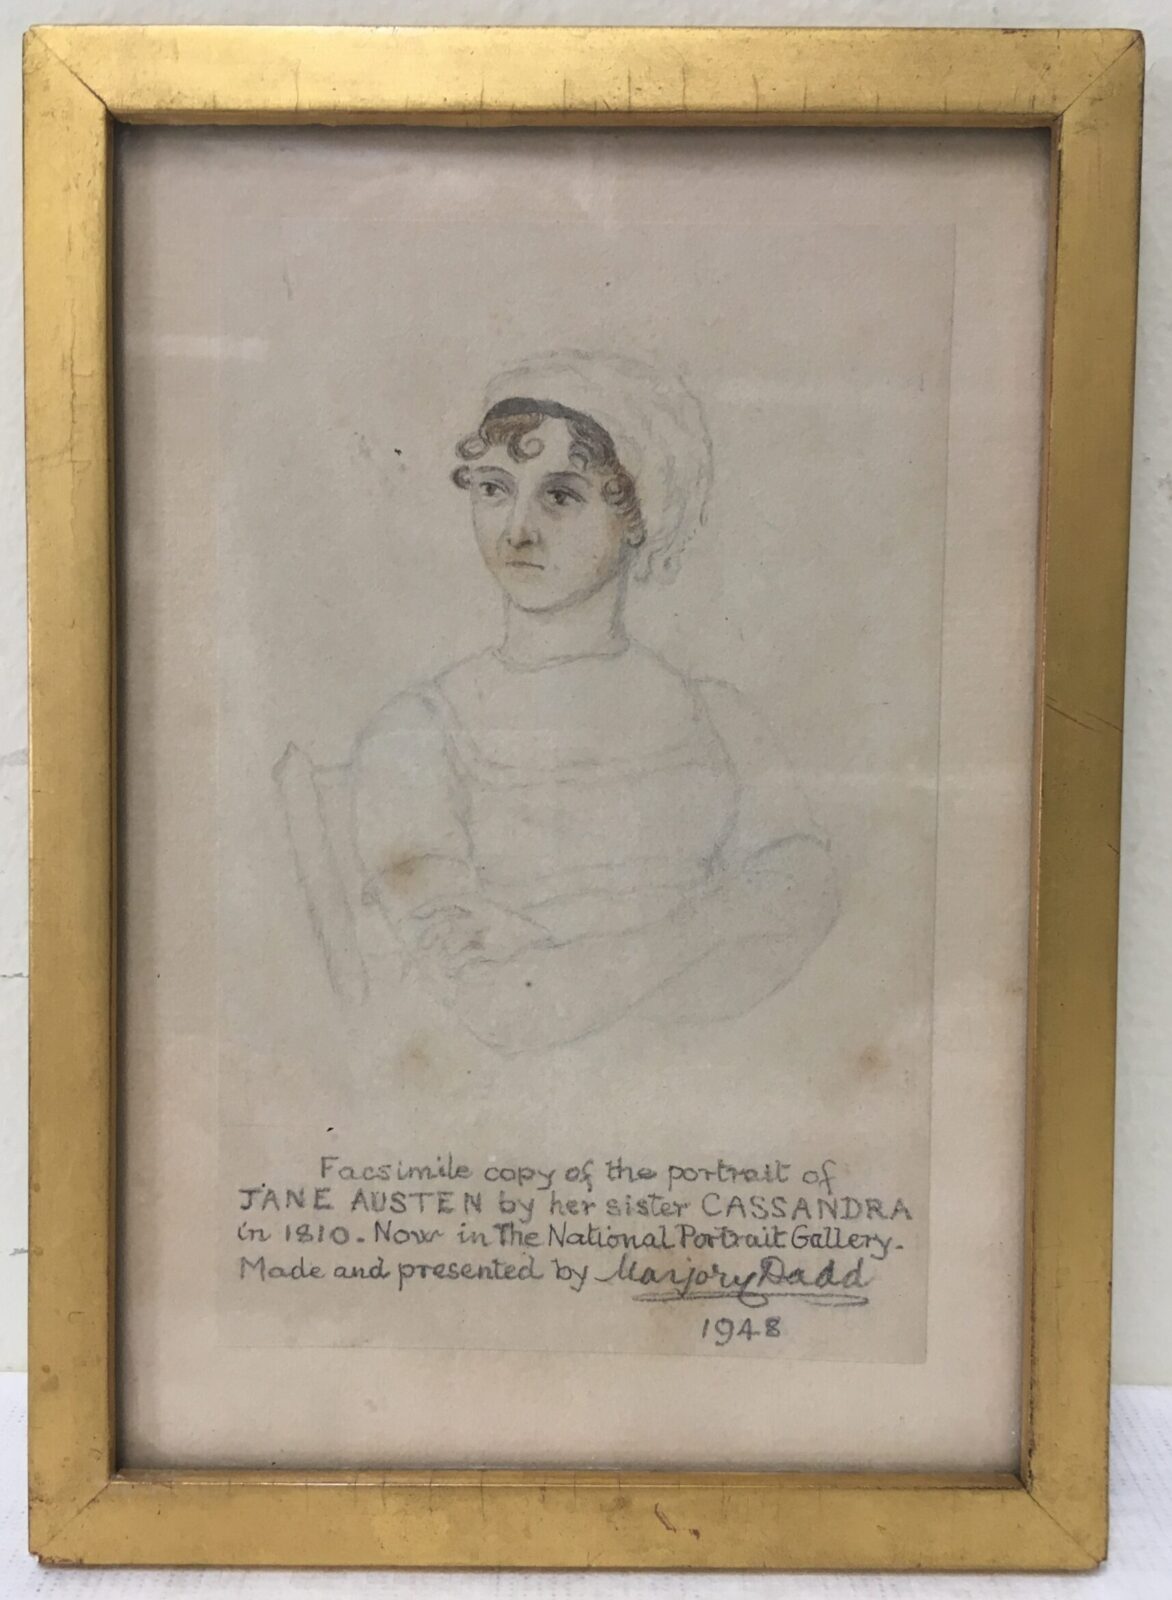 A facsimile copy of the portrait of Jane Austen by her sister Cassandra, reproduced in 1948 by Marjorie Dadd from the portrait in the National Portrait Gallery collection.